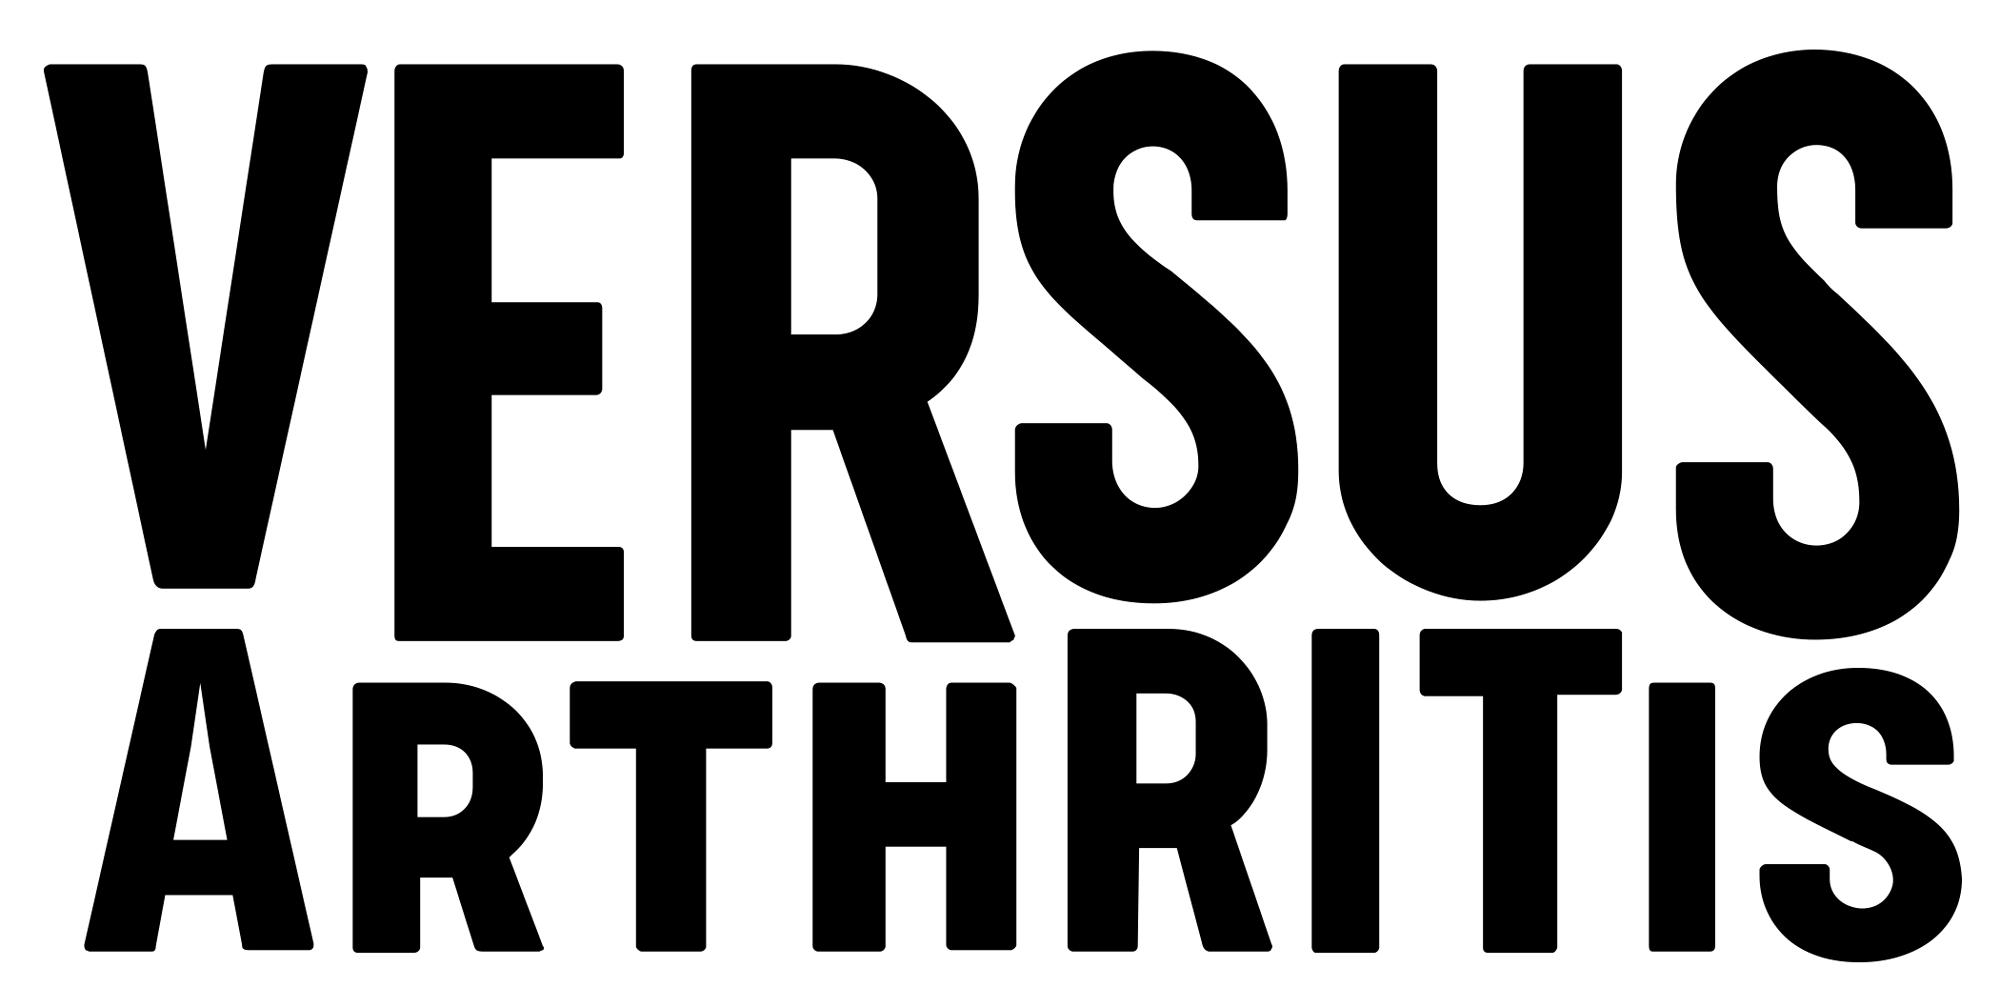 Brand New New Name Logo And Identity For Versus Arthritis By Re